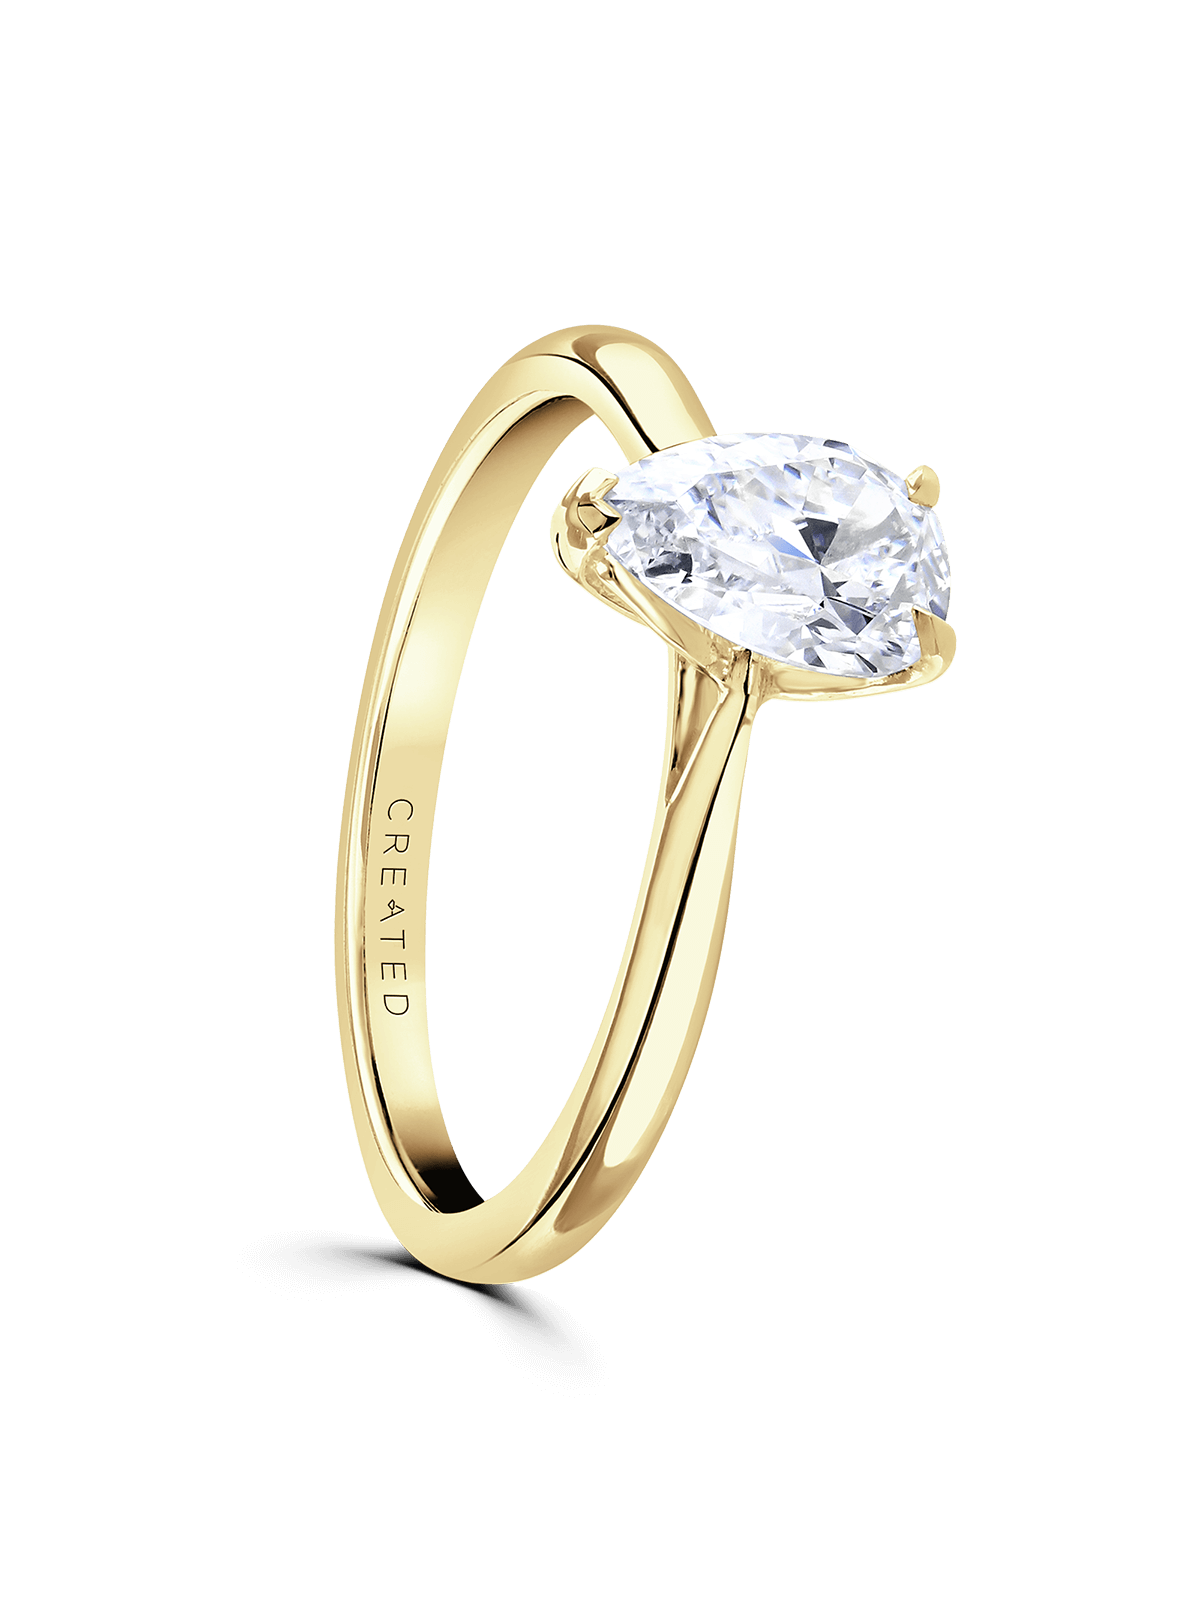 "Magnolia" Approx 1.50ct Pear Cut Lab Grown Diamond Solitaire Engagement Ring in 18ct Yellow Gold